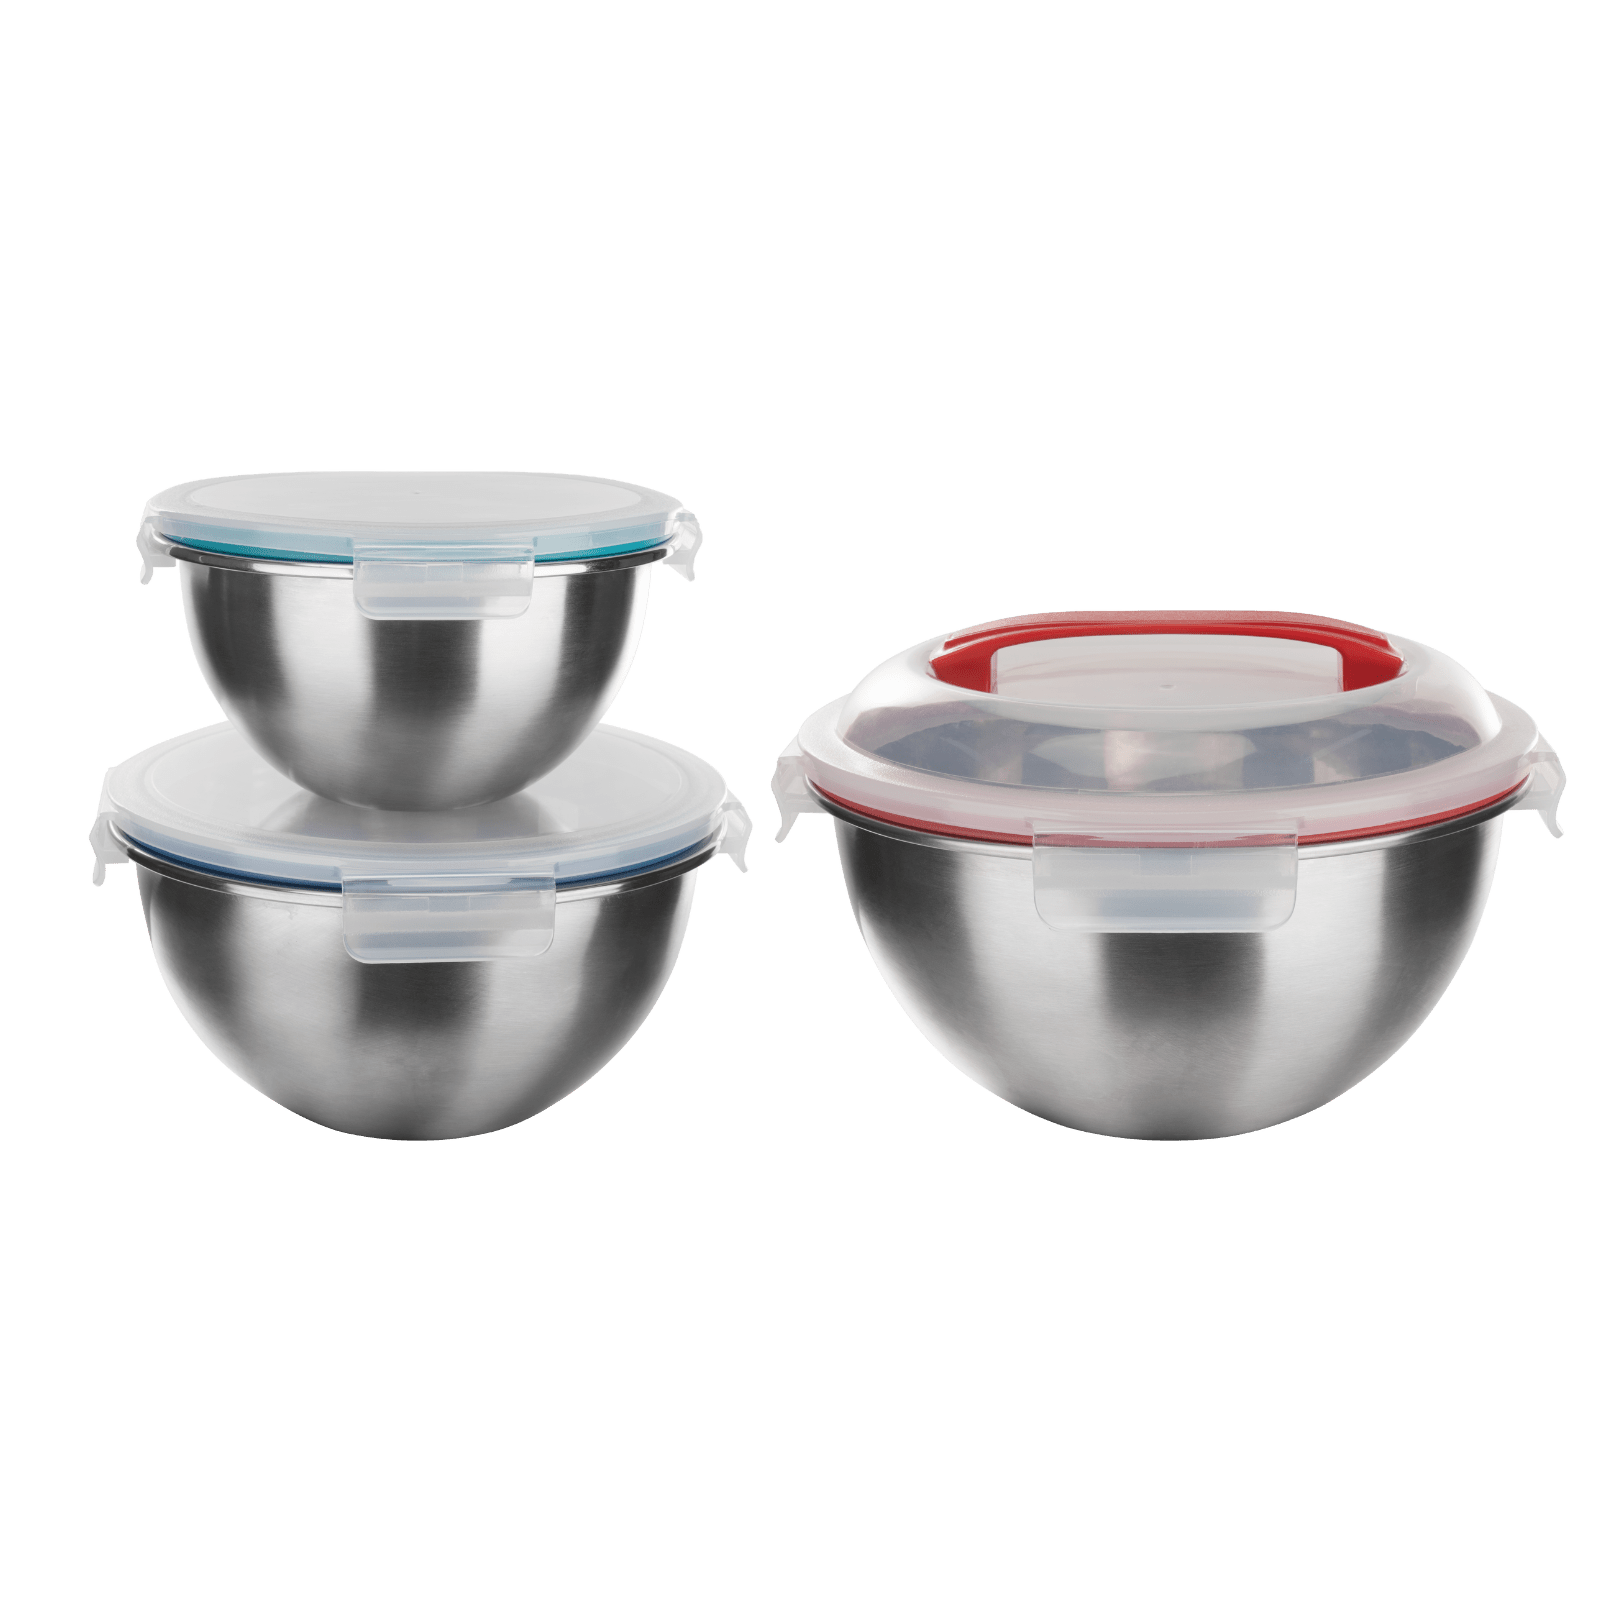 Stainless Steel Nested Mixing Bowl Set